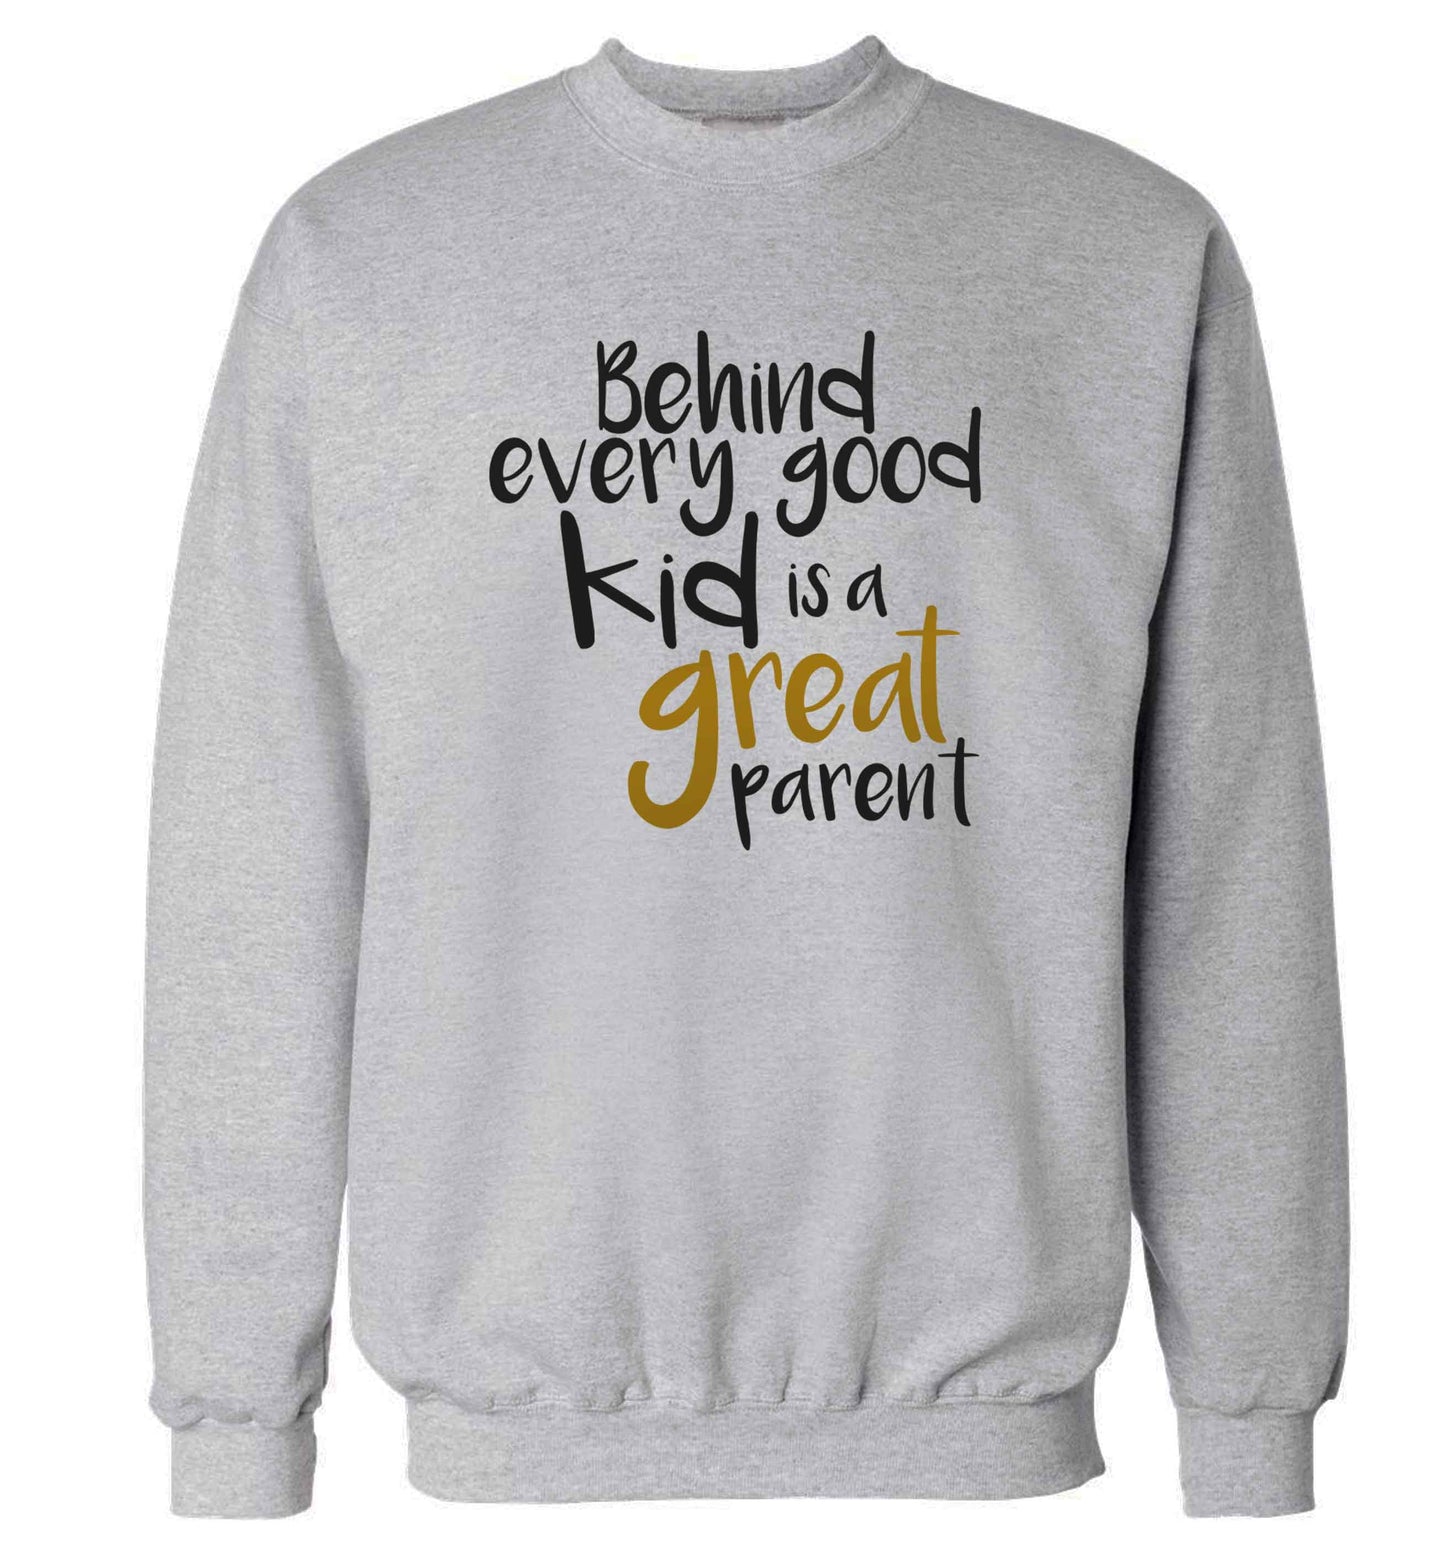 Behind every good kid is a great parent adult's unisex grey sweater 2XL